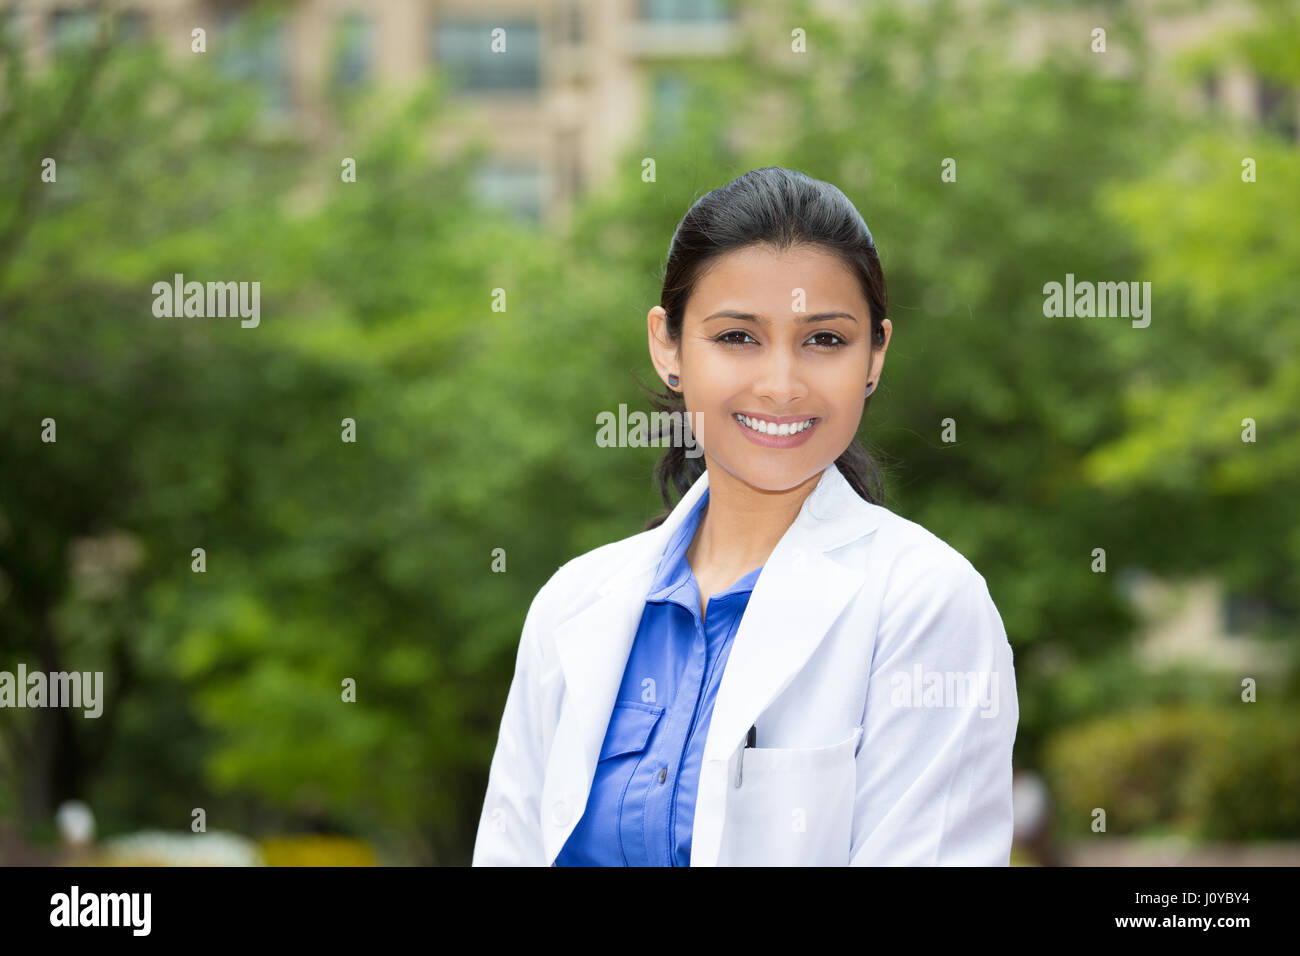 Closeup headshot portrait of friendly, cheerful, smiling confident female, healthcare professional with lab coat. isolated outdoors outside green tree Stock Photo